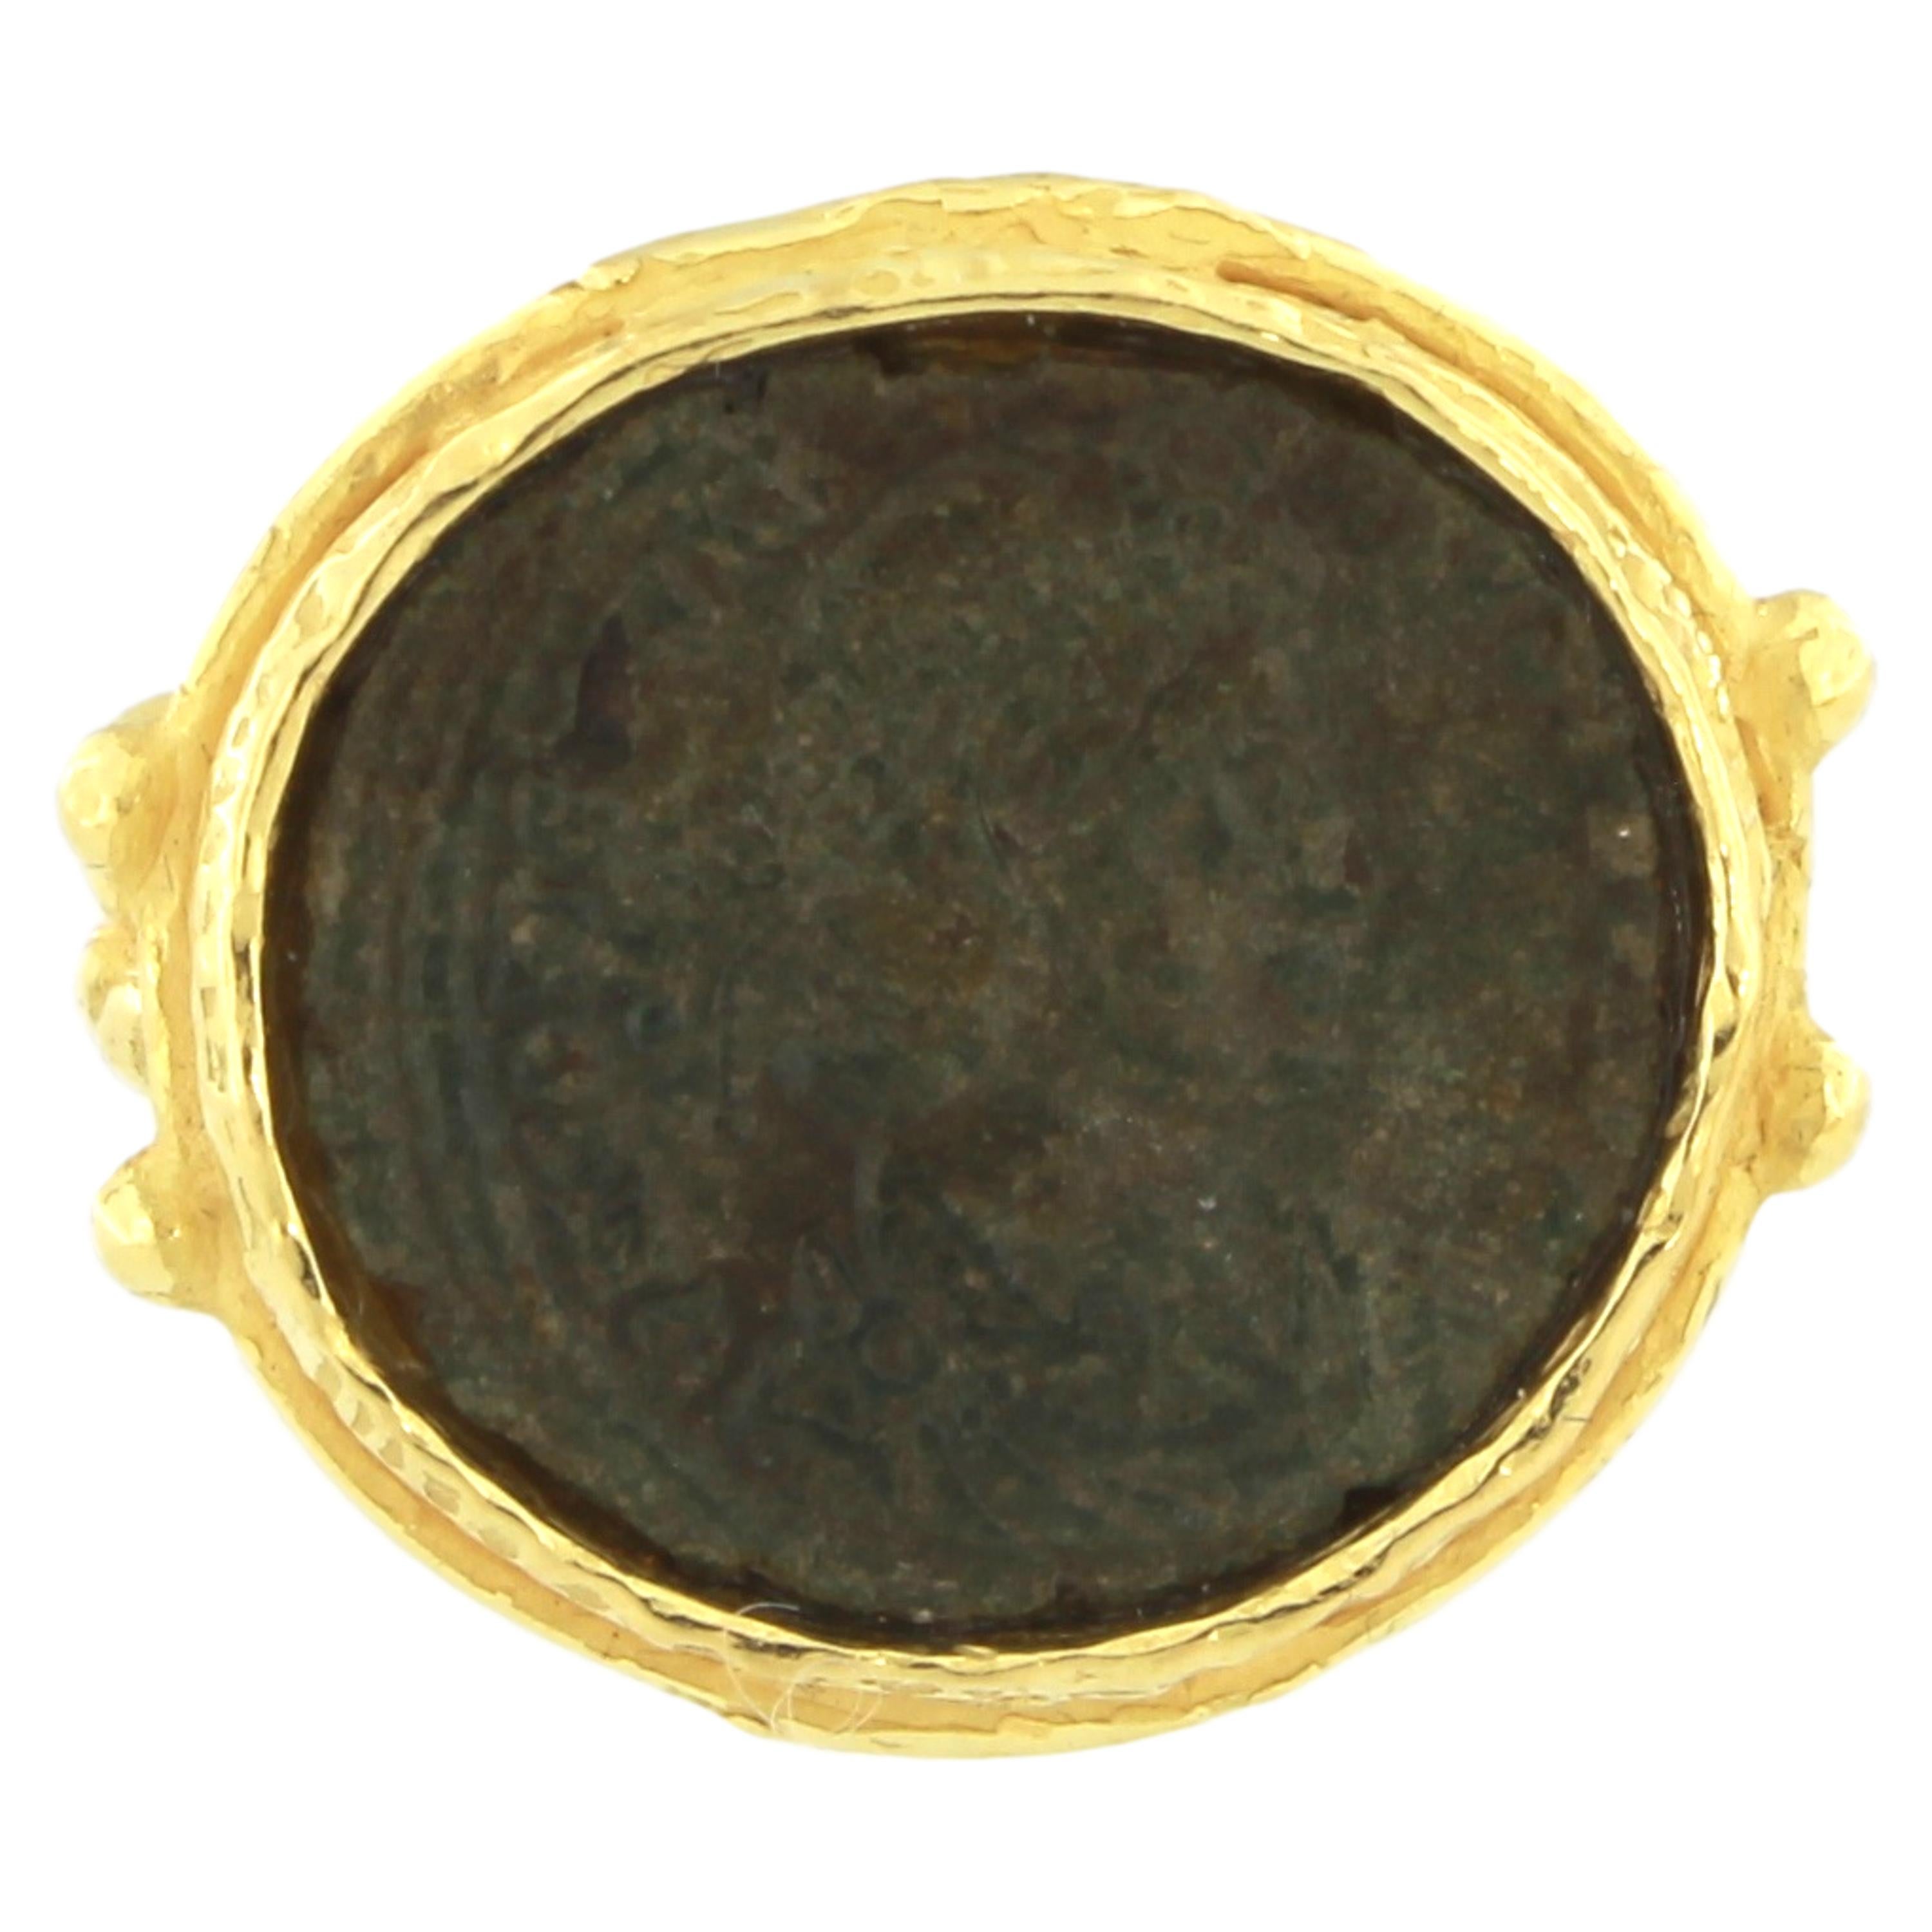 ancient roman ring for sale